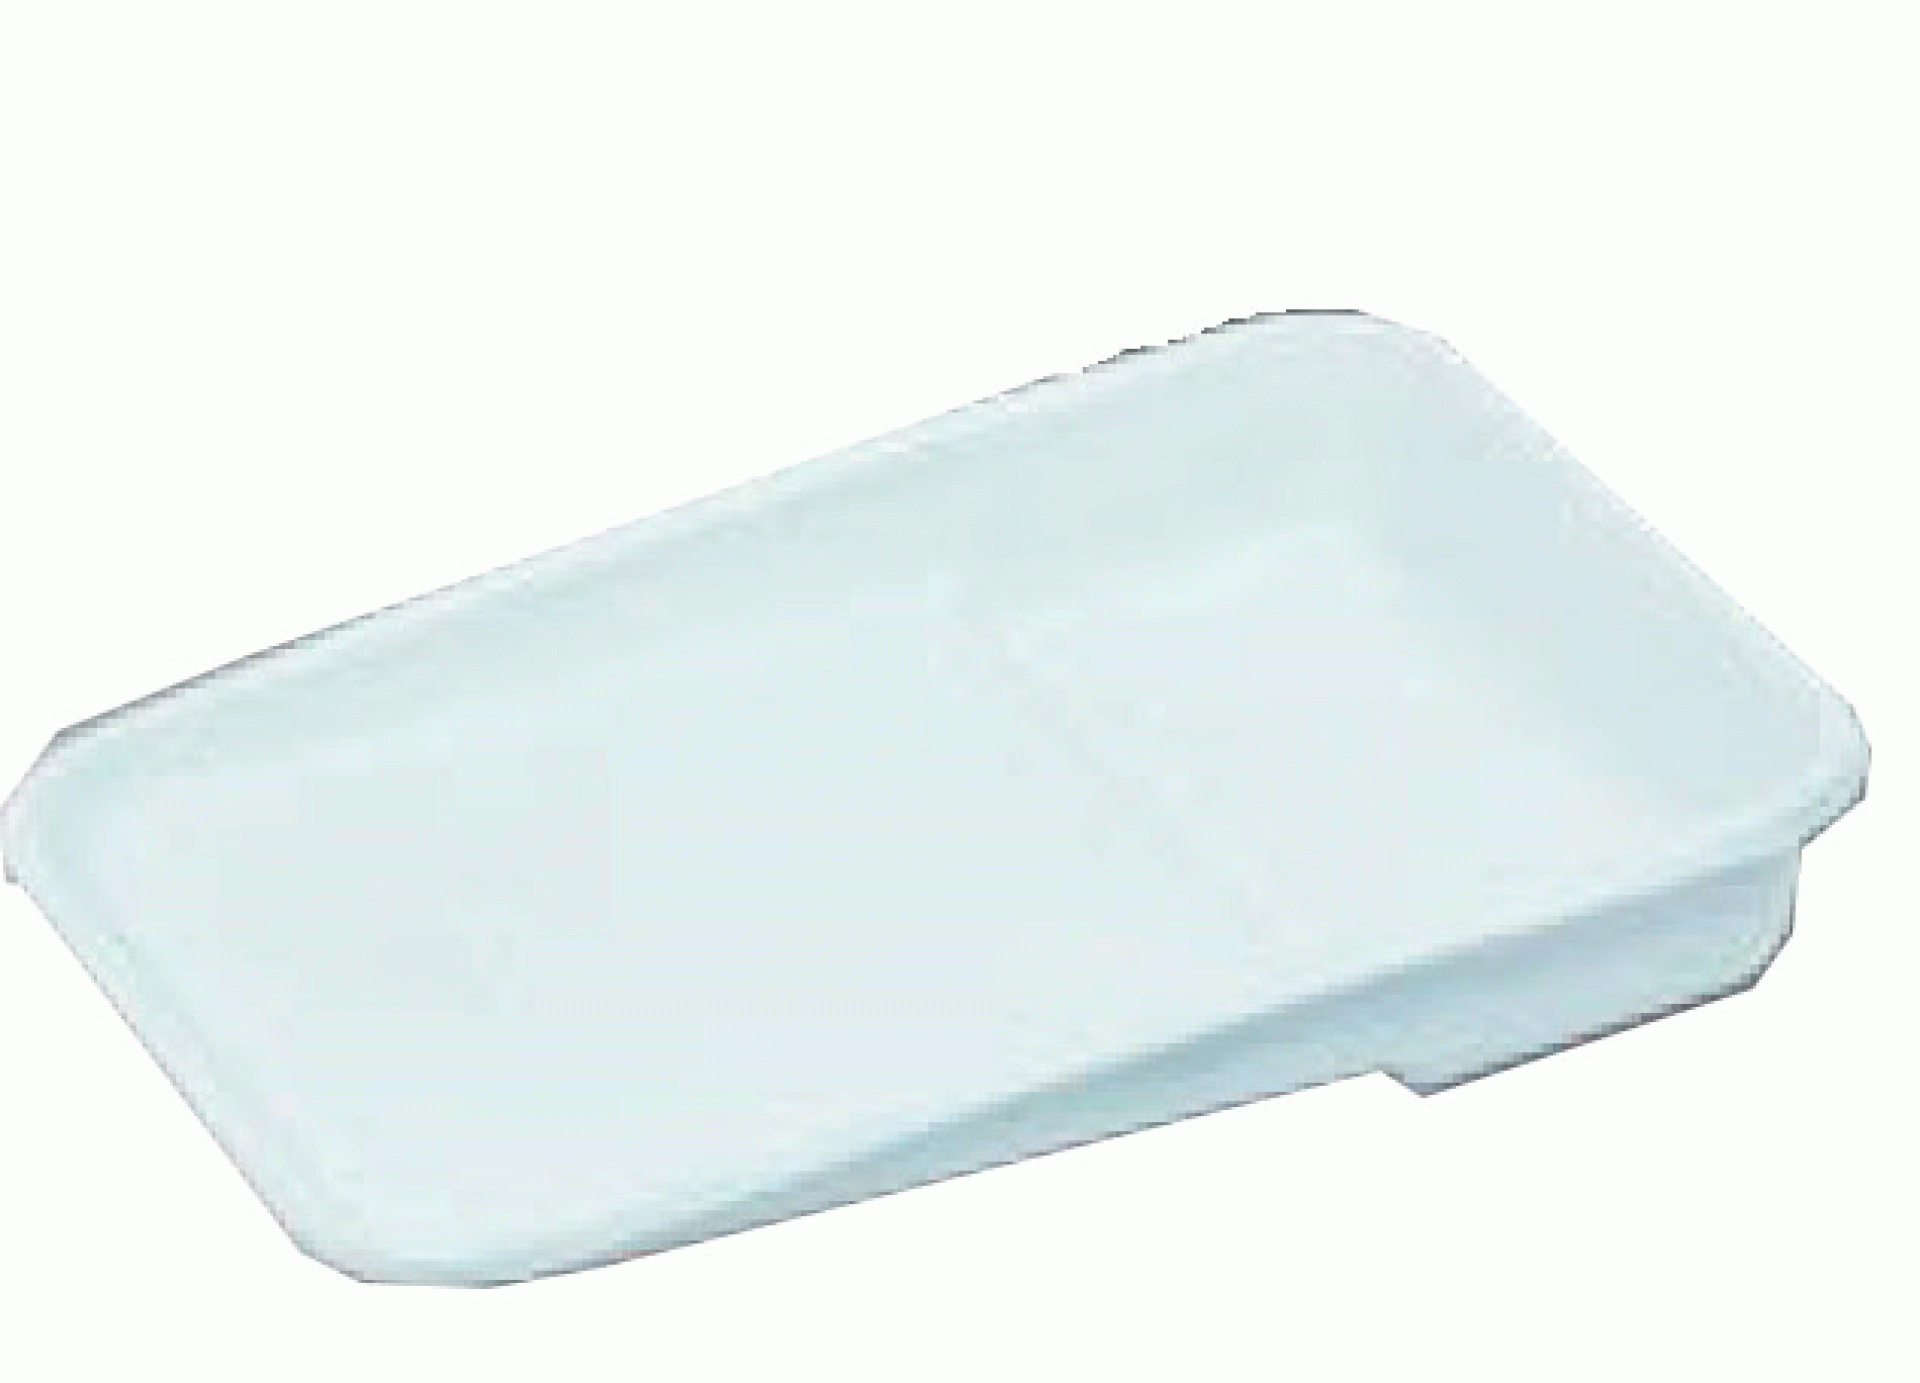 LINZER PRODUCTS | RM 4110 | PAINT TRAY LINER 1 QUART - 10/PK